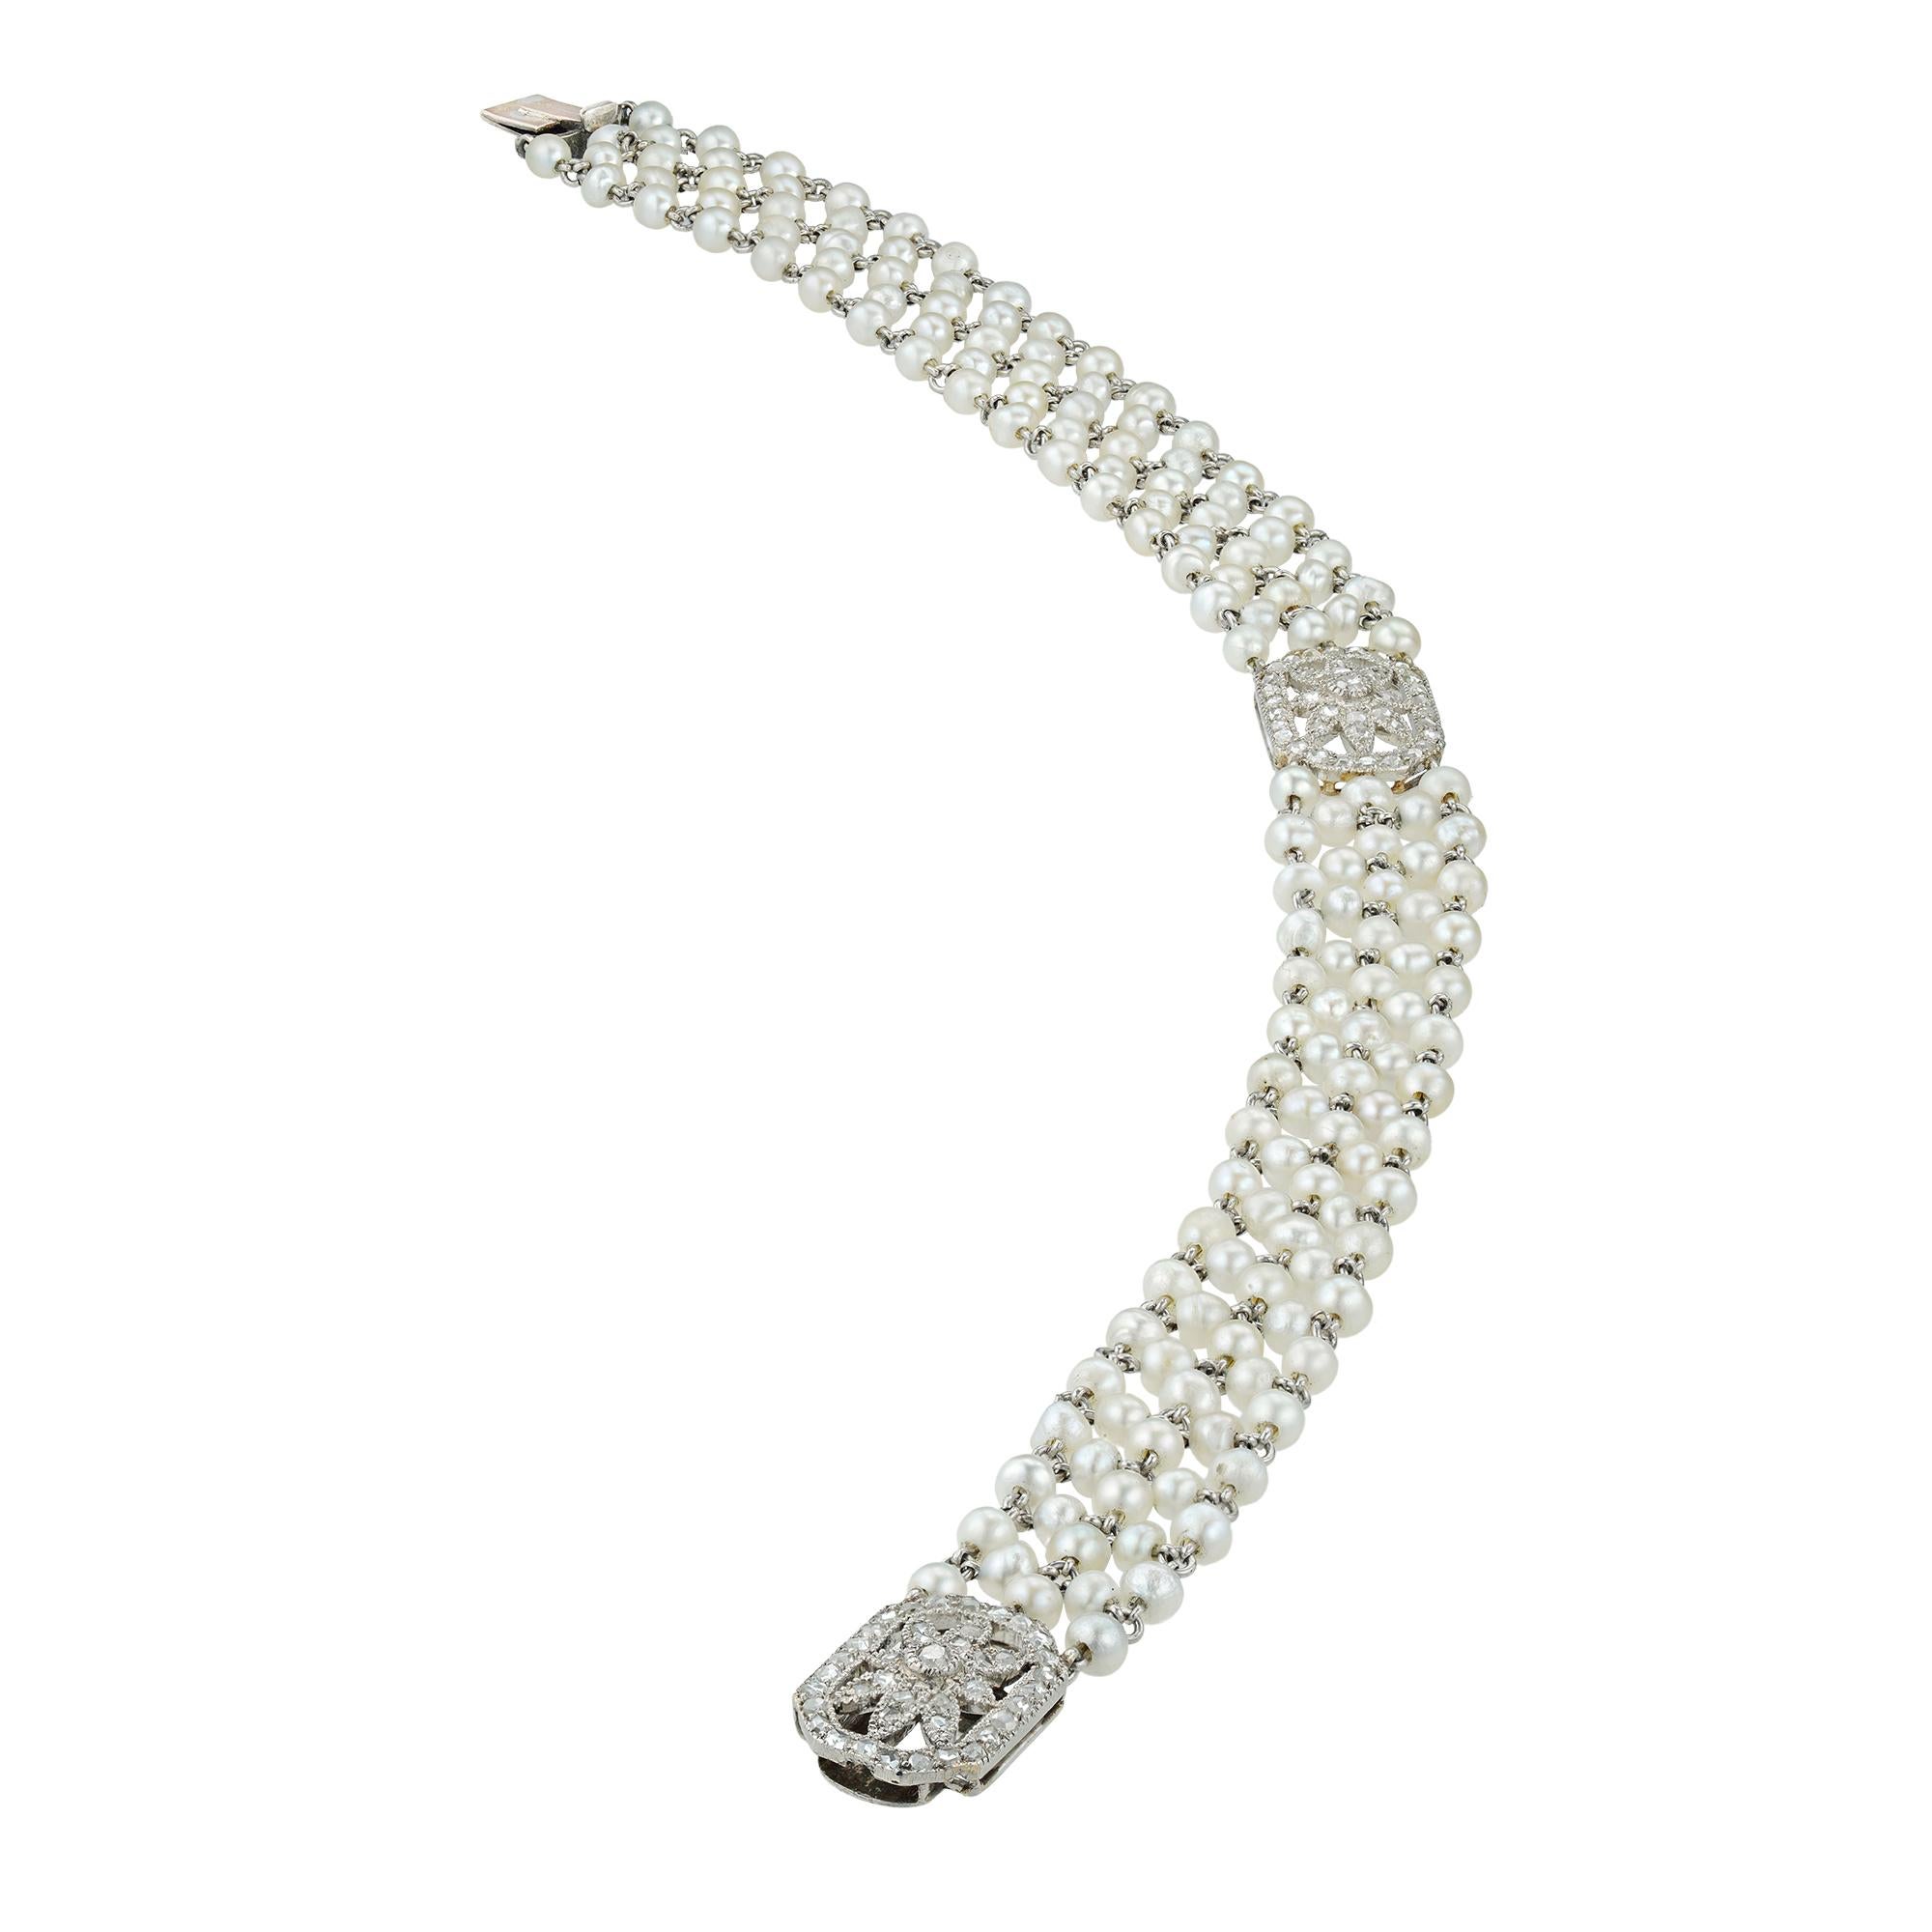 An Edwardian pearl and diamond bracelet, consisted of two openwork diamond encrusted plaques, linked with pearl-set mesh, all mounted in platinum, circa 1905,total length approximately 20cm, gross weight 13.6 grams.

Edwardian bracelet in good